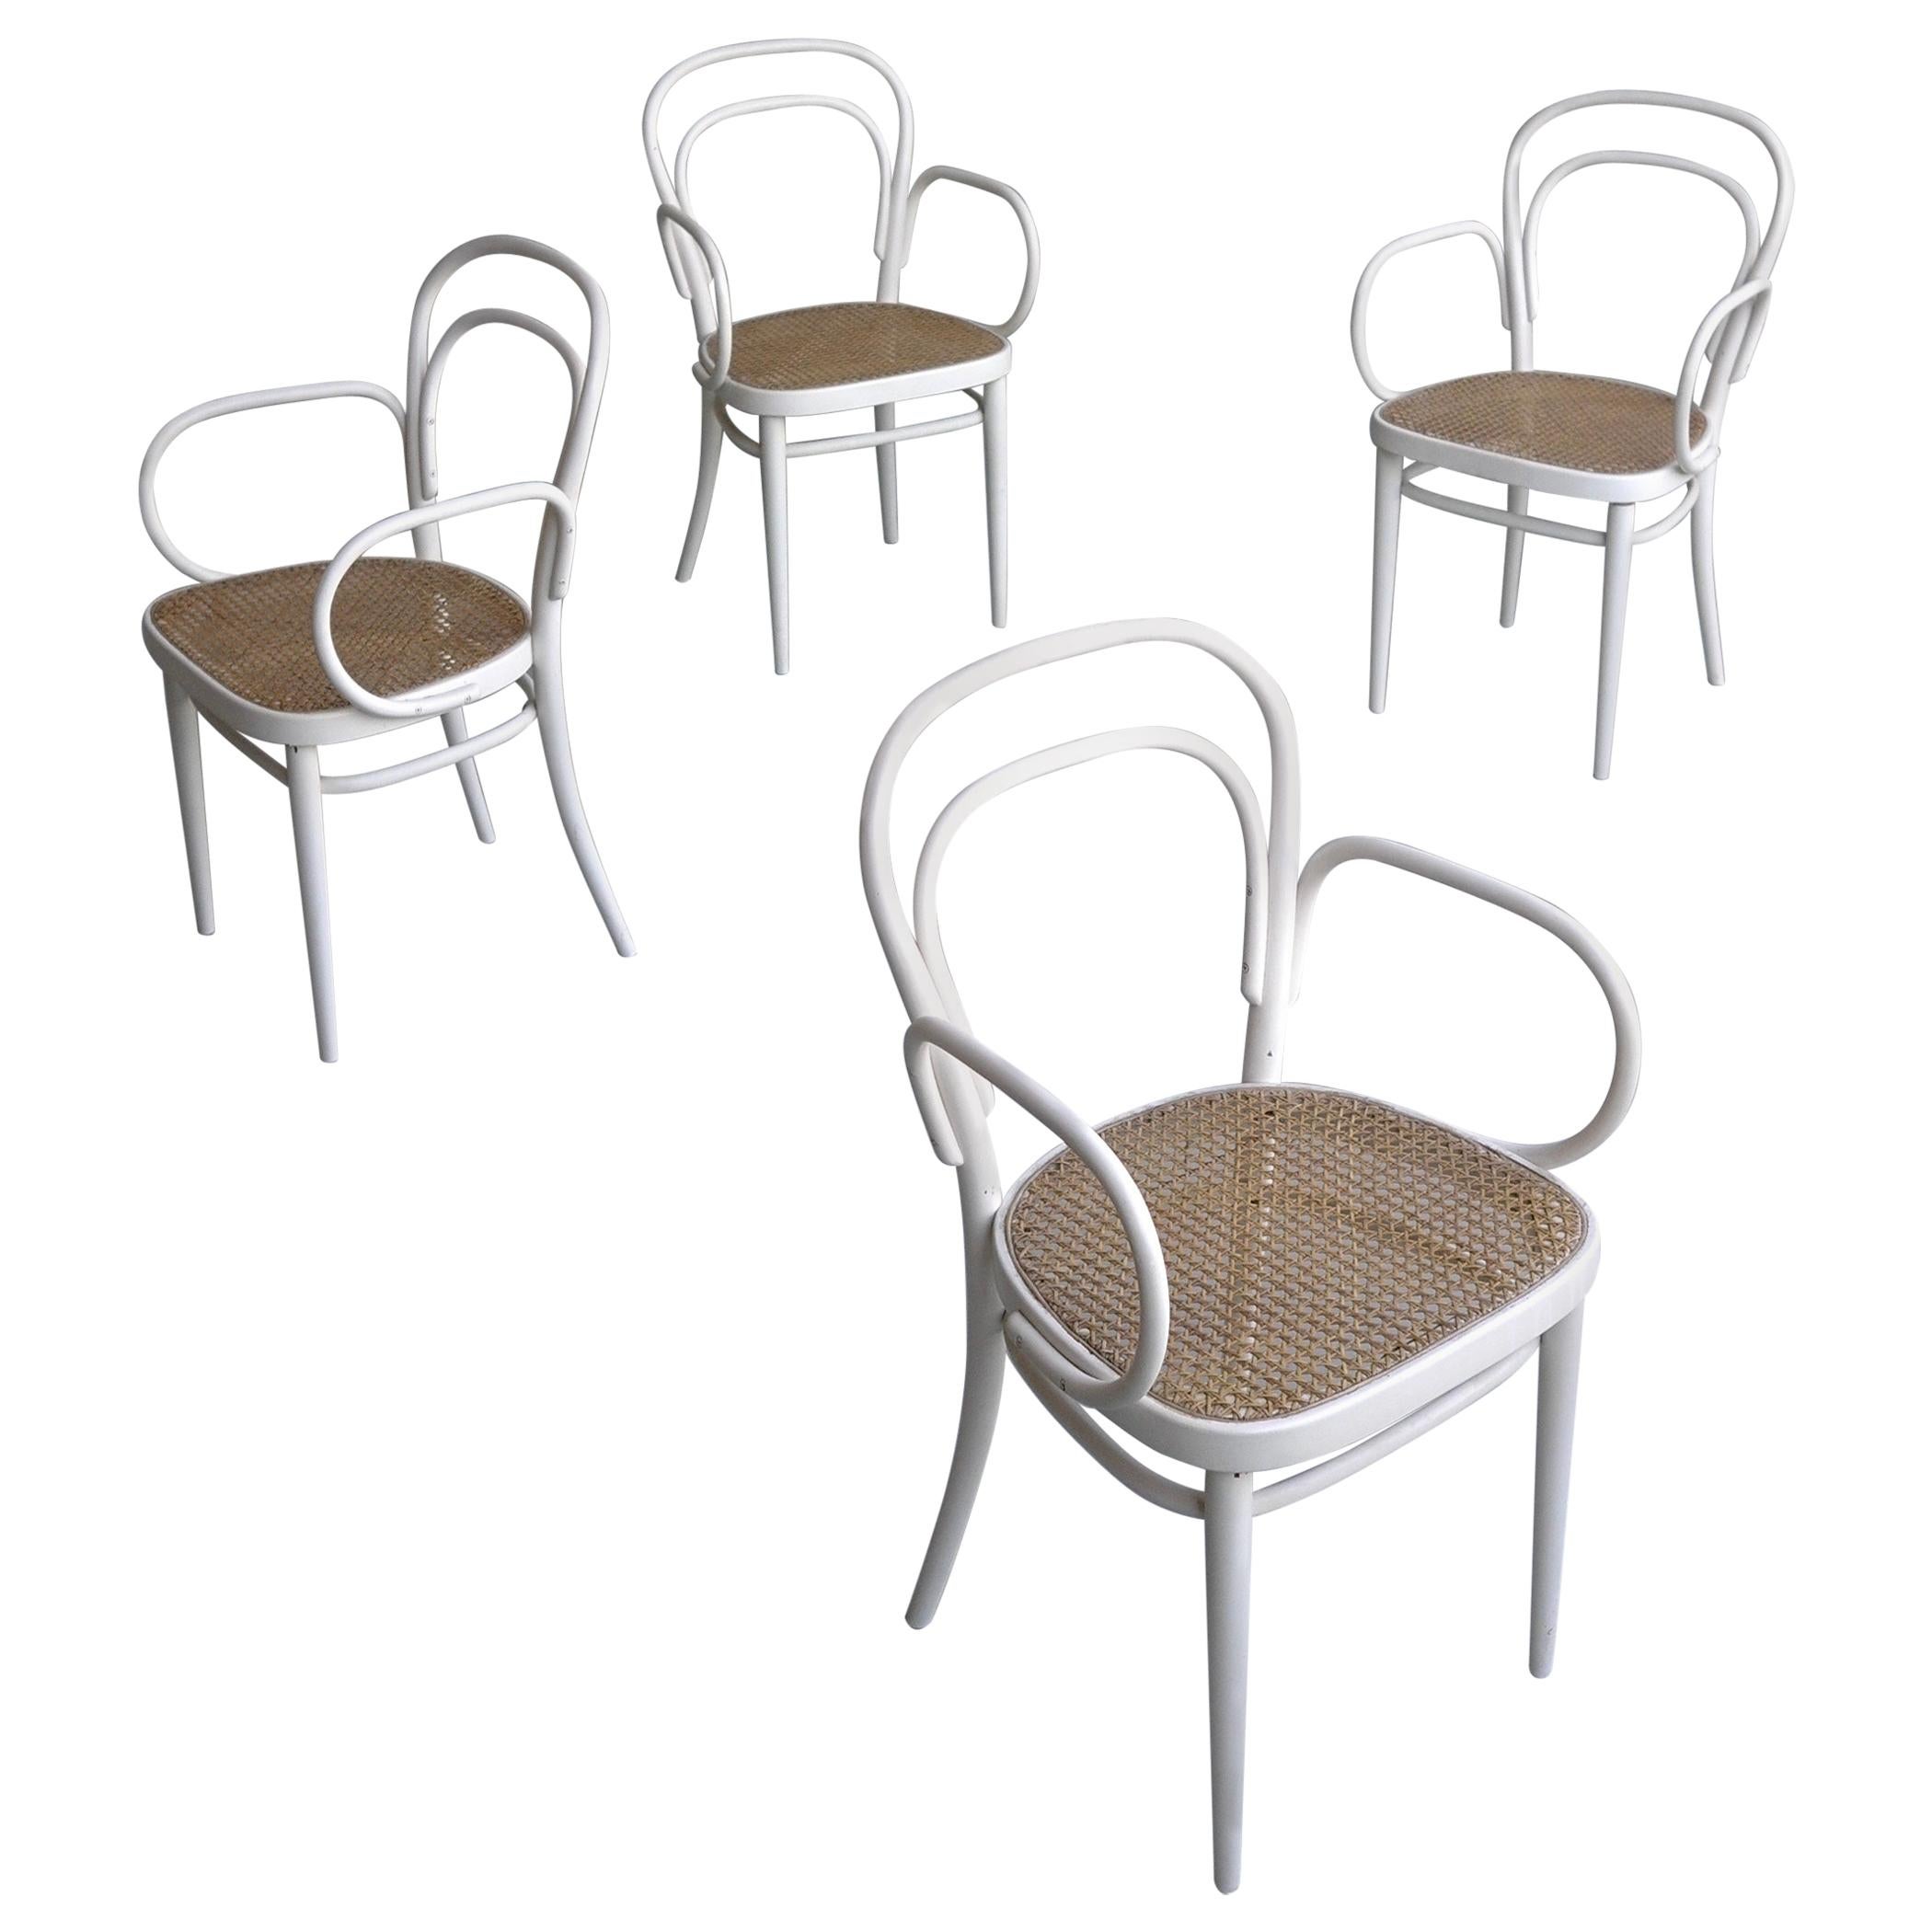 Set of Four White Thonet nr. 14 Armchairs with Wicker Seats, Vienna, 1960s For Sale